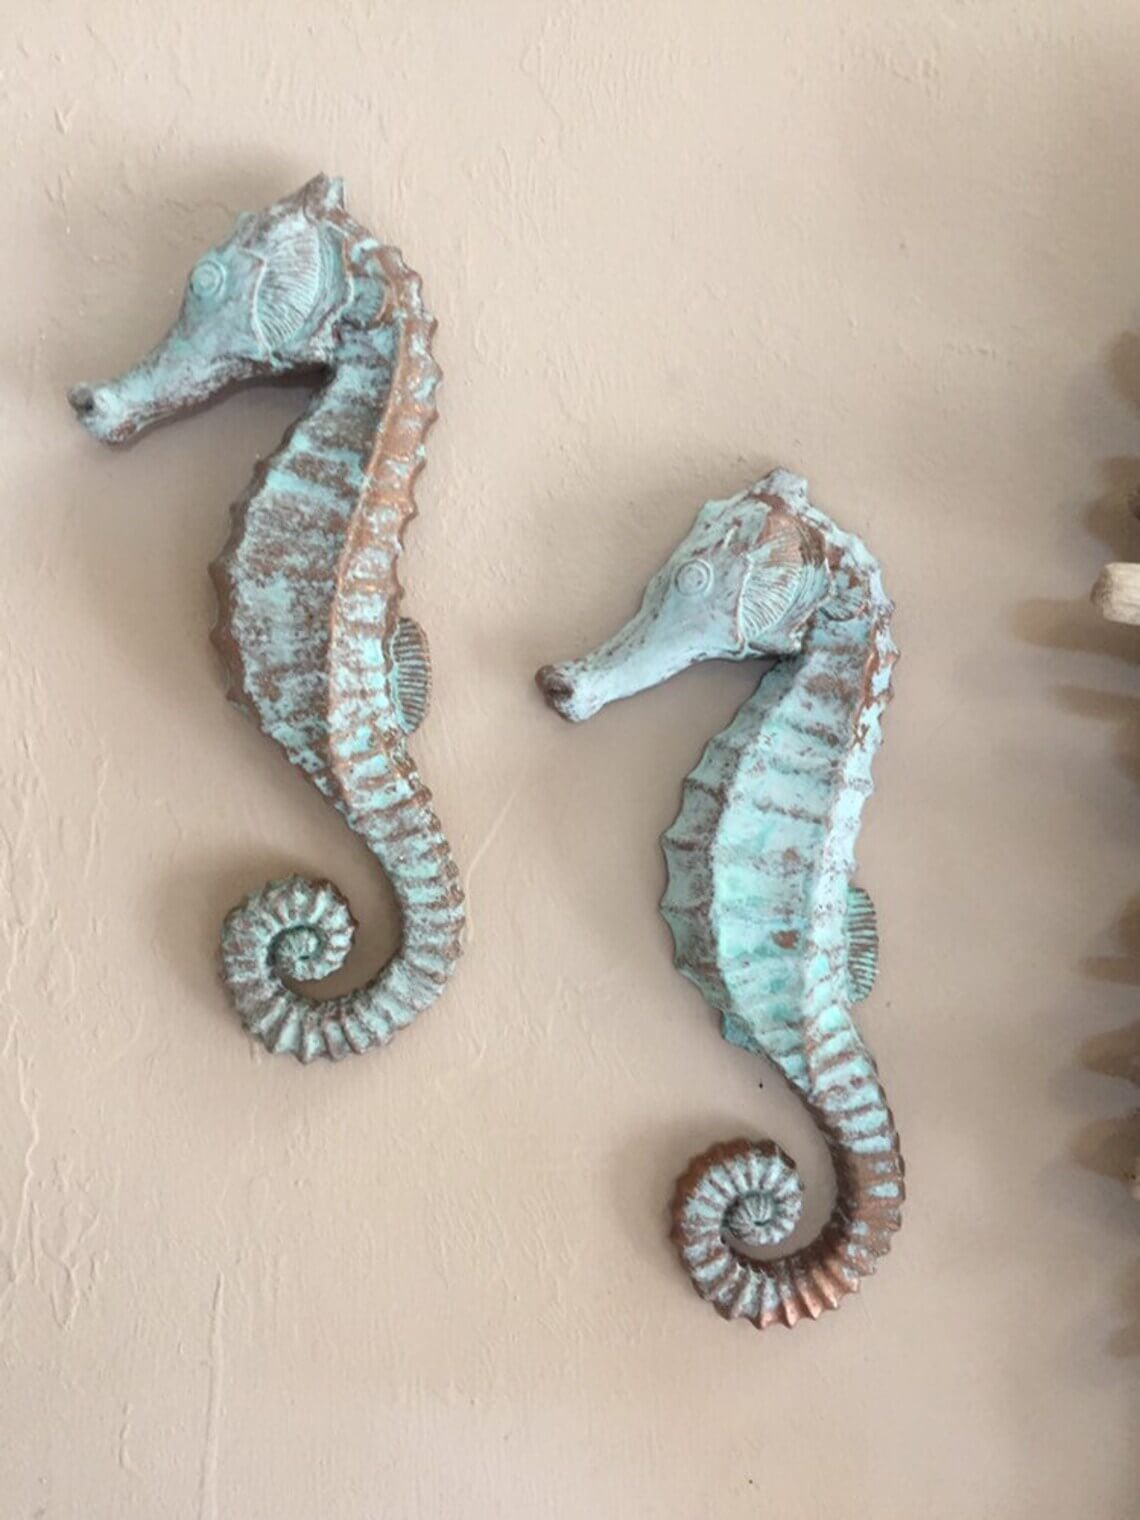 Charming Blue Seahorses in Pairs